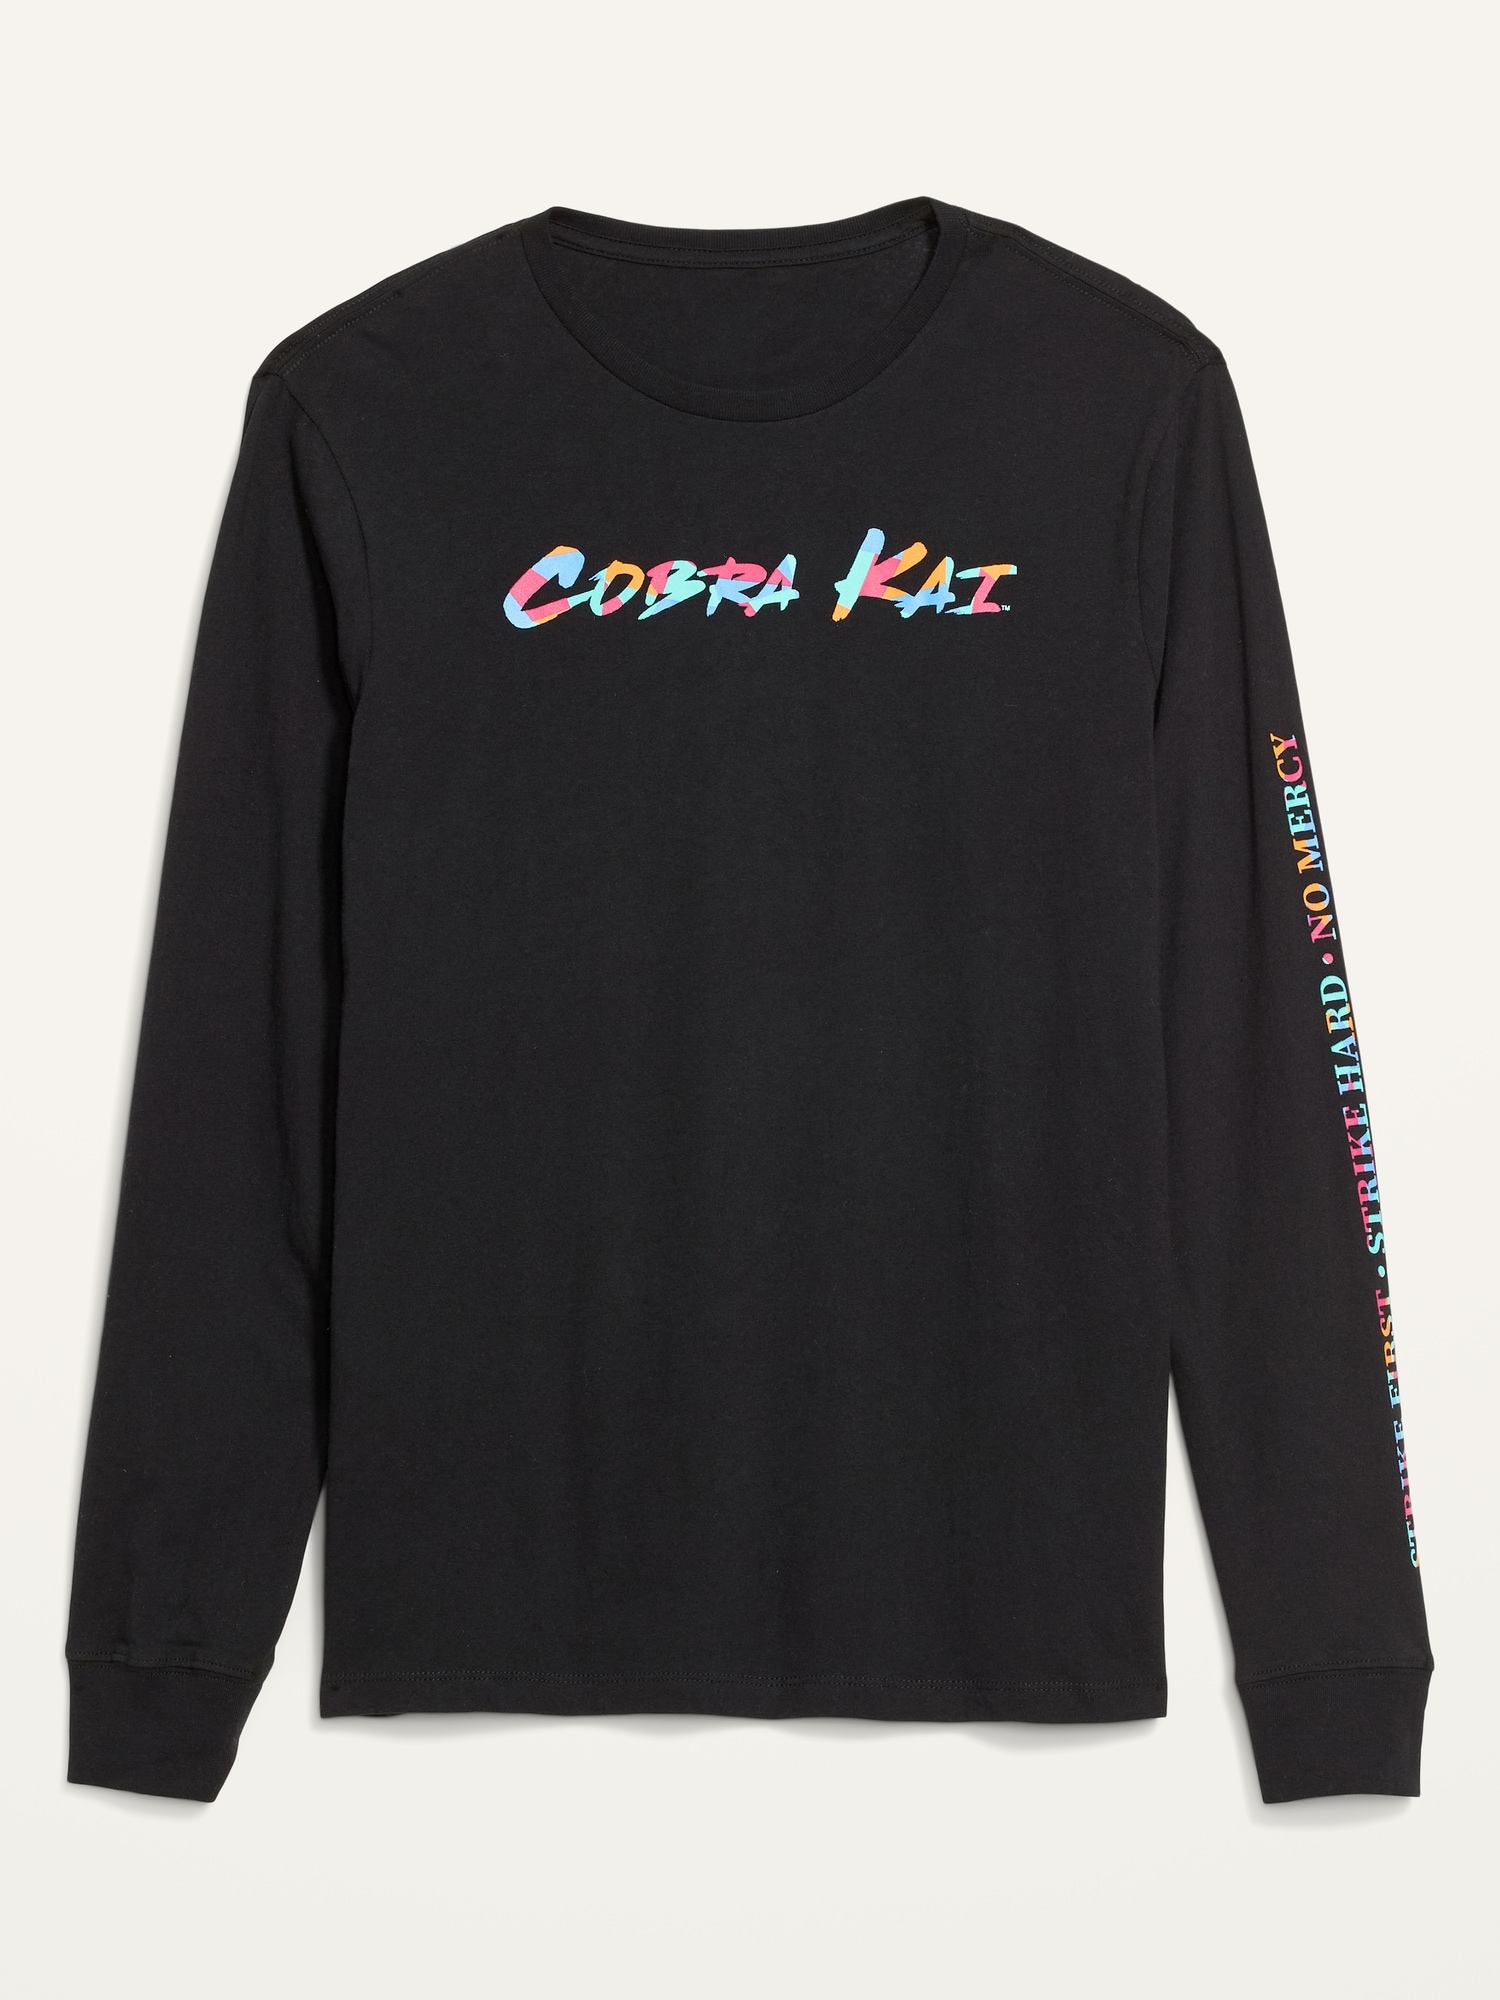 Cobra Kai™ Gender-Neutral Long-Sleeve T-Shirt for Adults | Old Navy